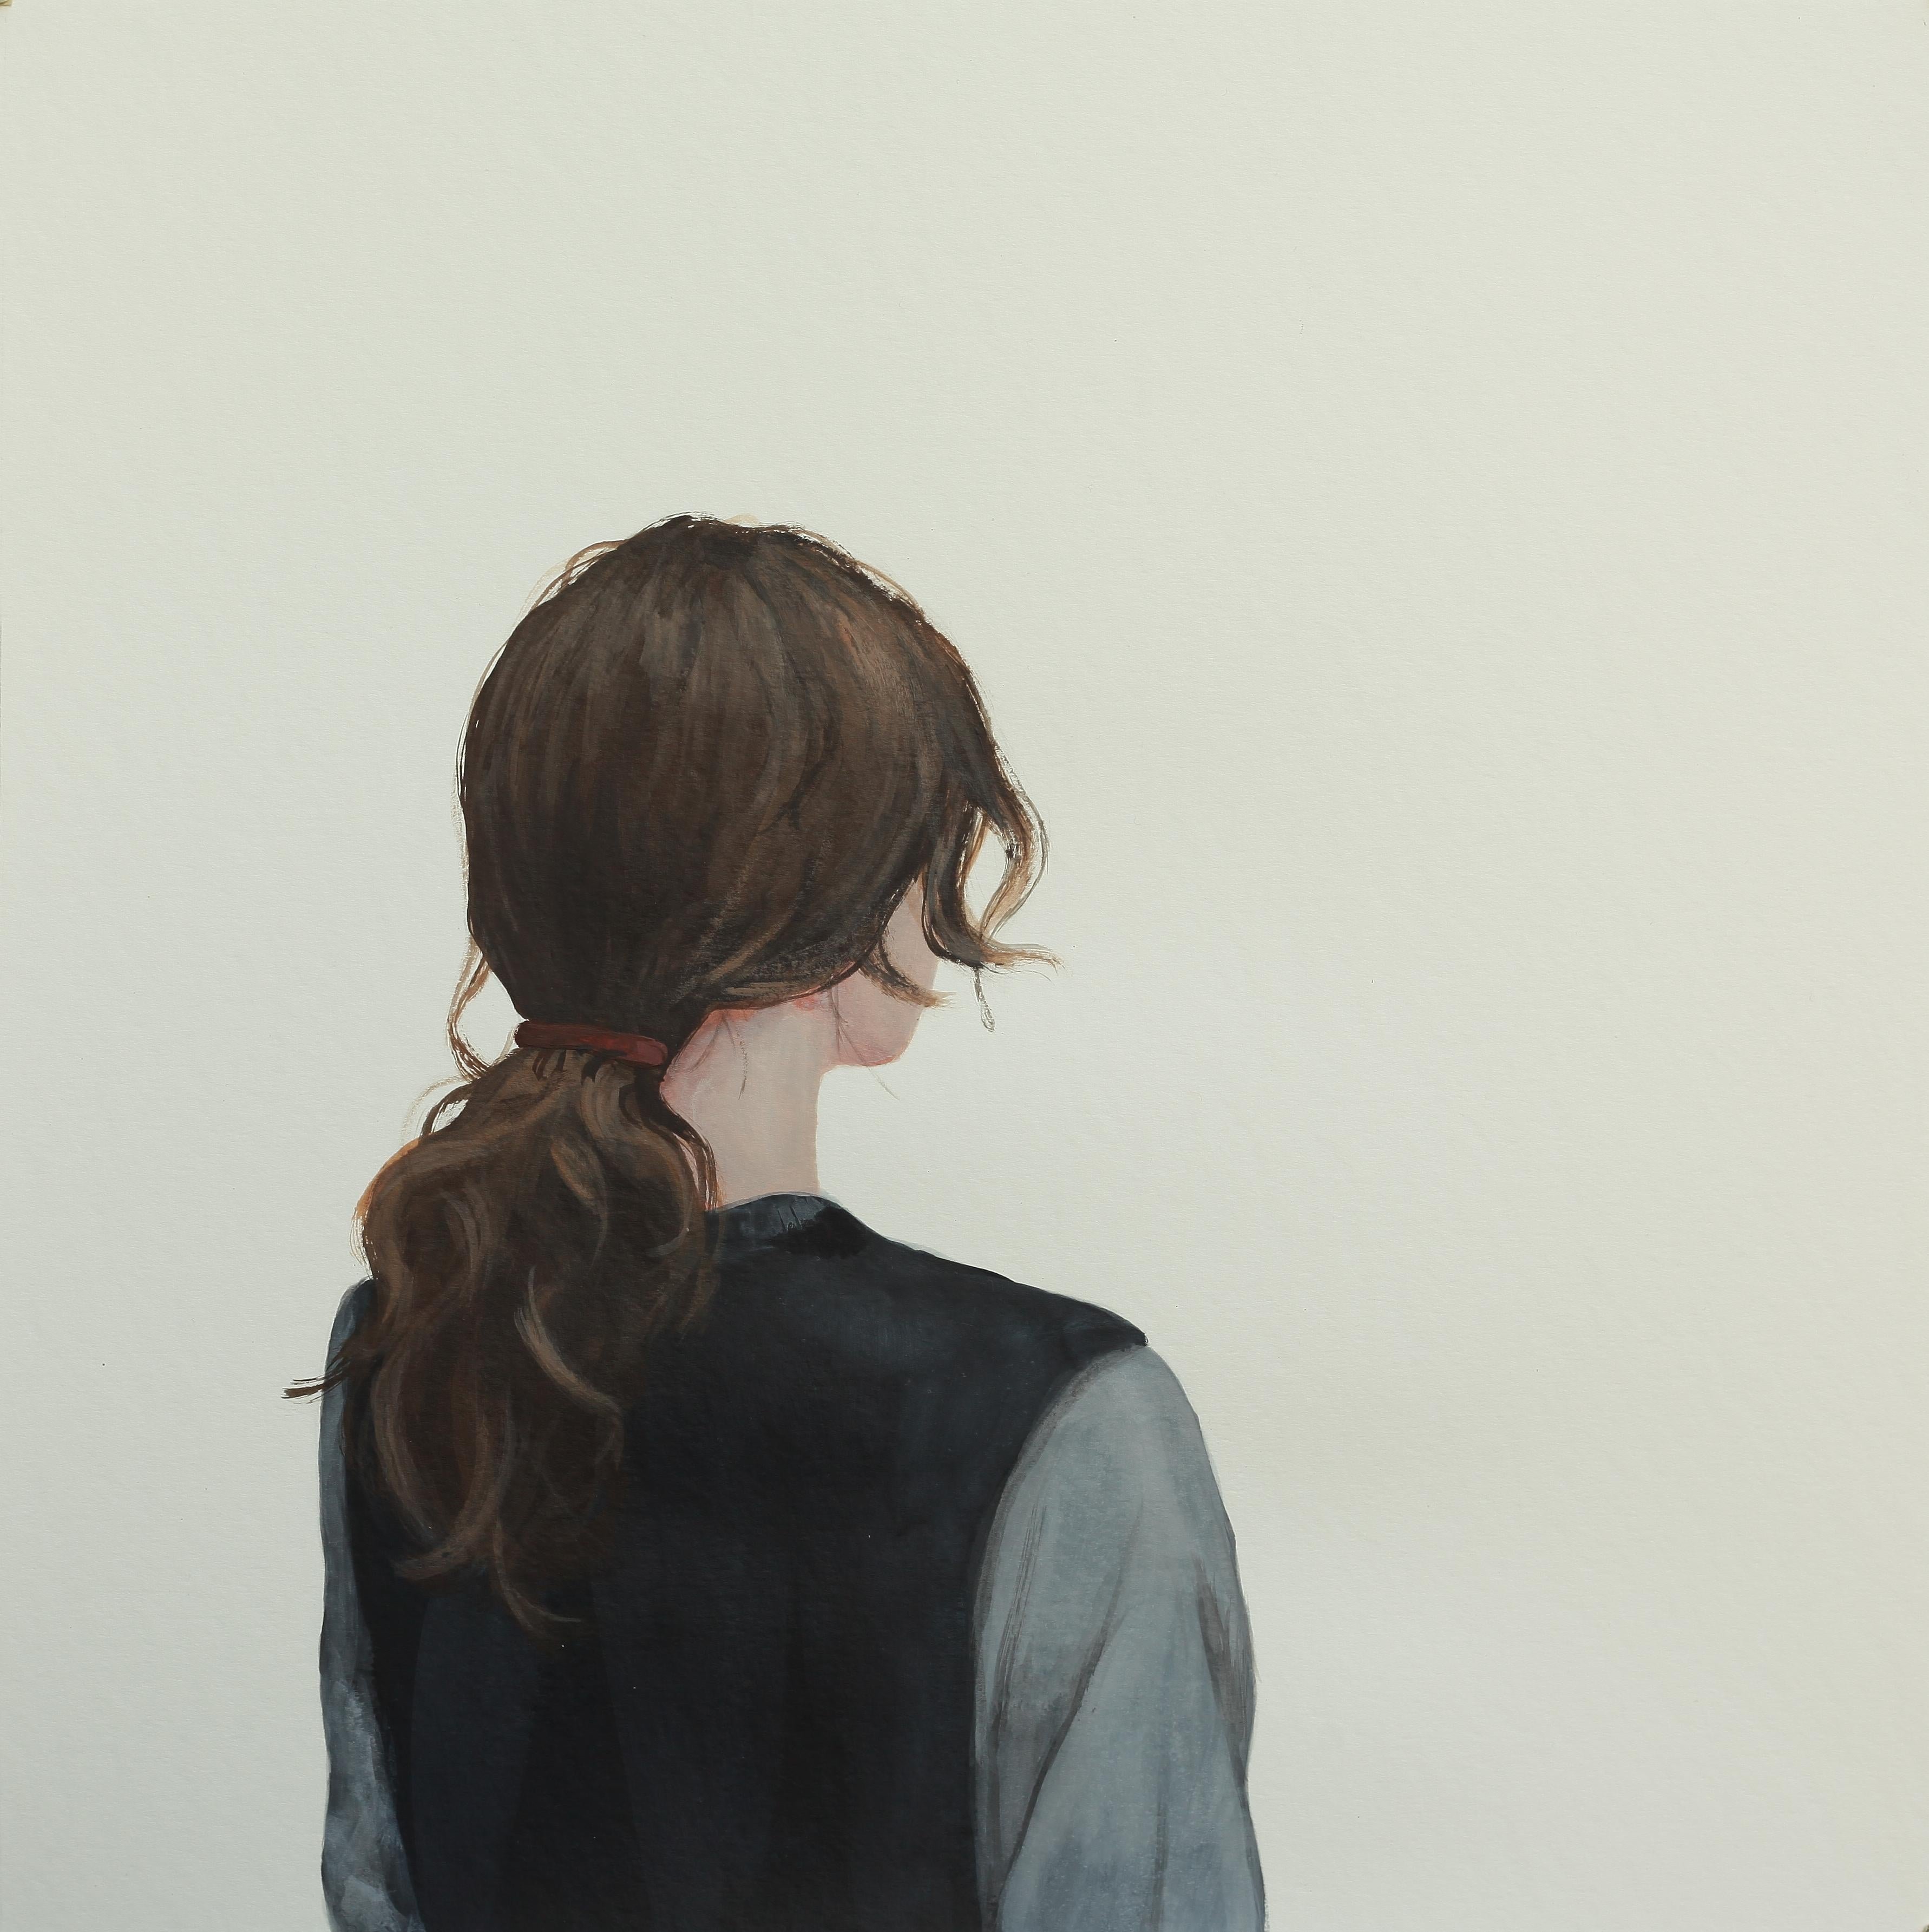 Karoline Kroiss Figurative Painting - "Look to the Side XV" Contemporary Portrait Painting of a Girl